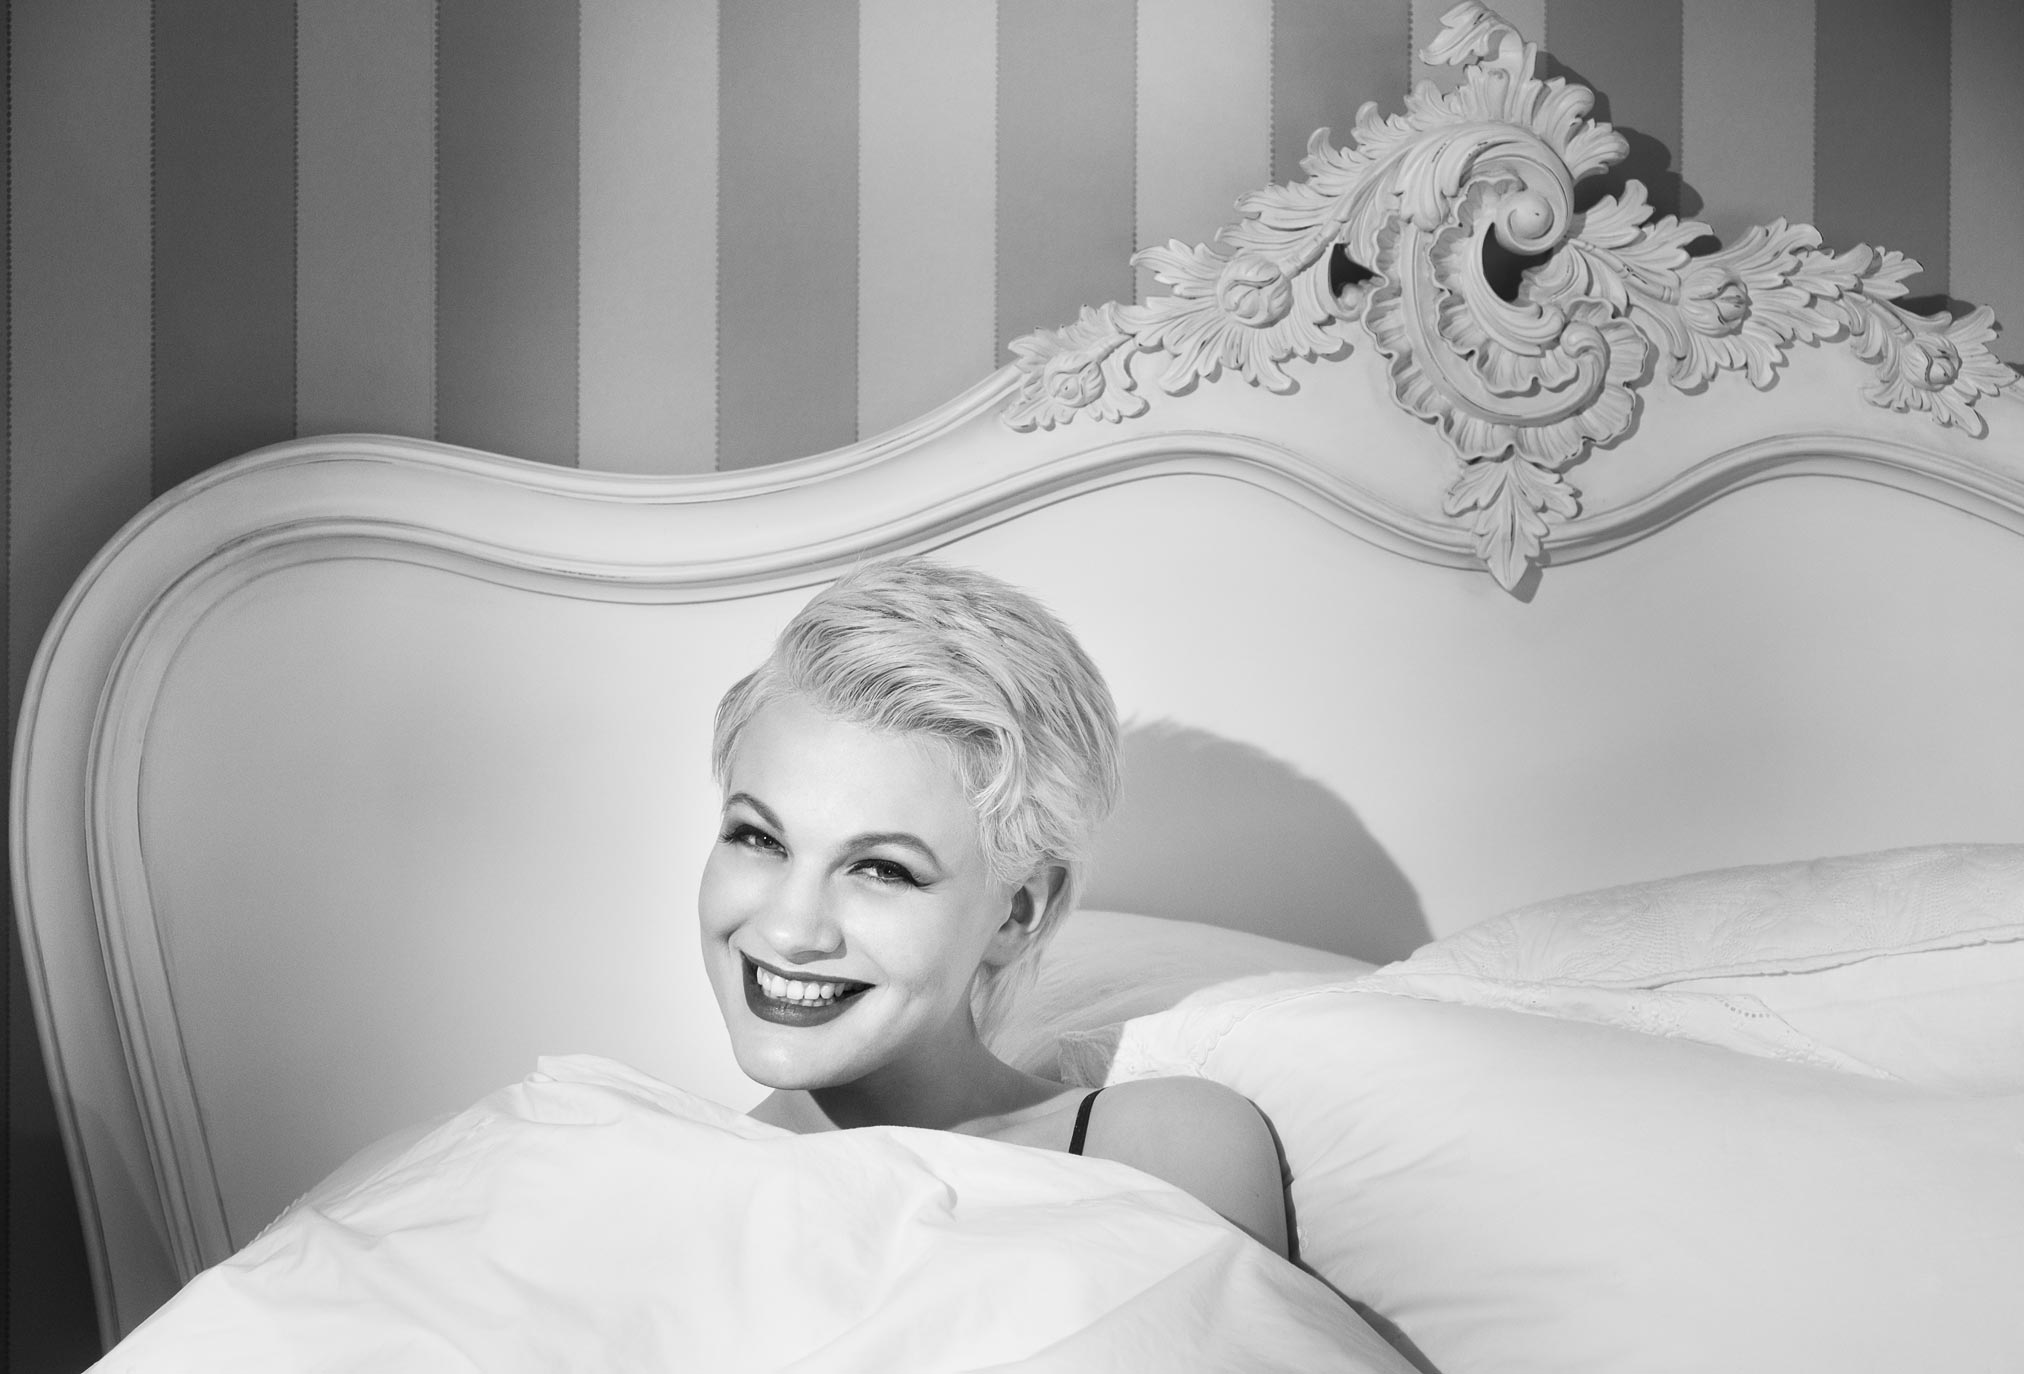 Chloe-Jasmine in bed in the gate cottage at Pipewell Hall, UK